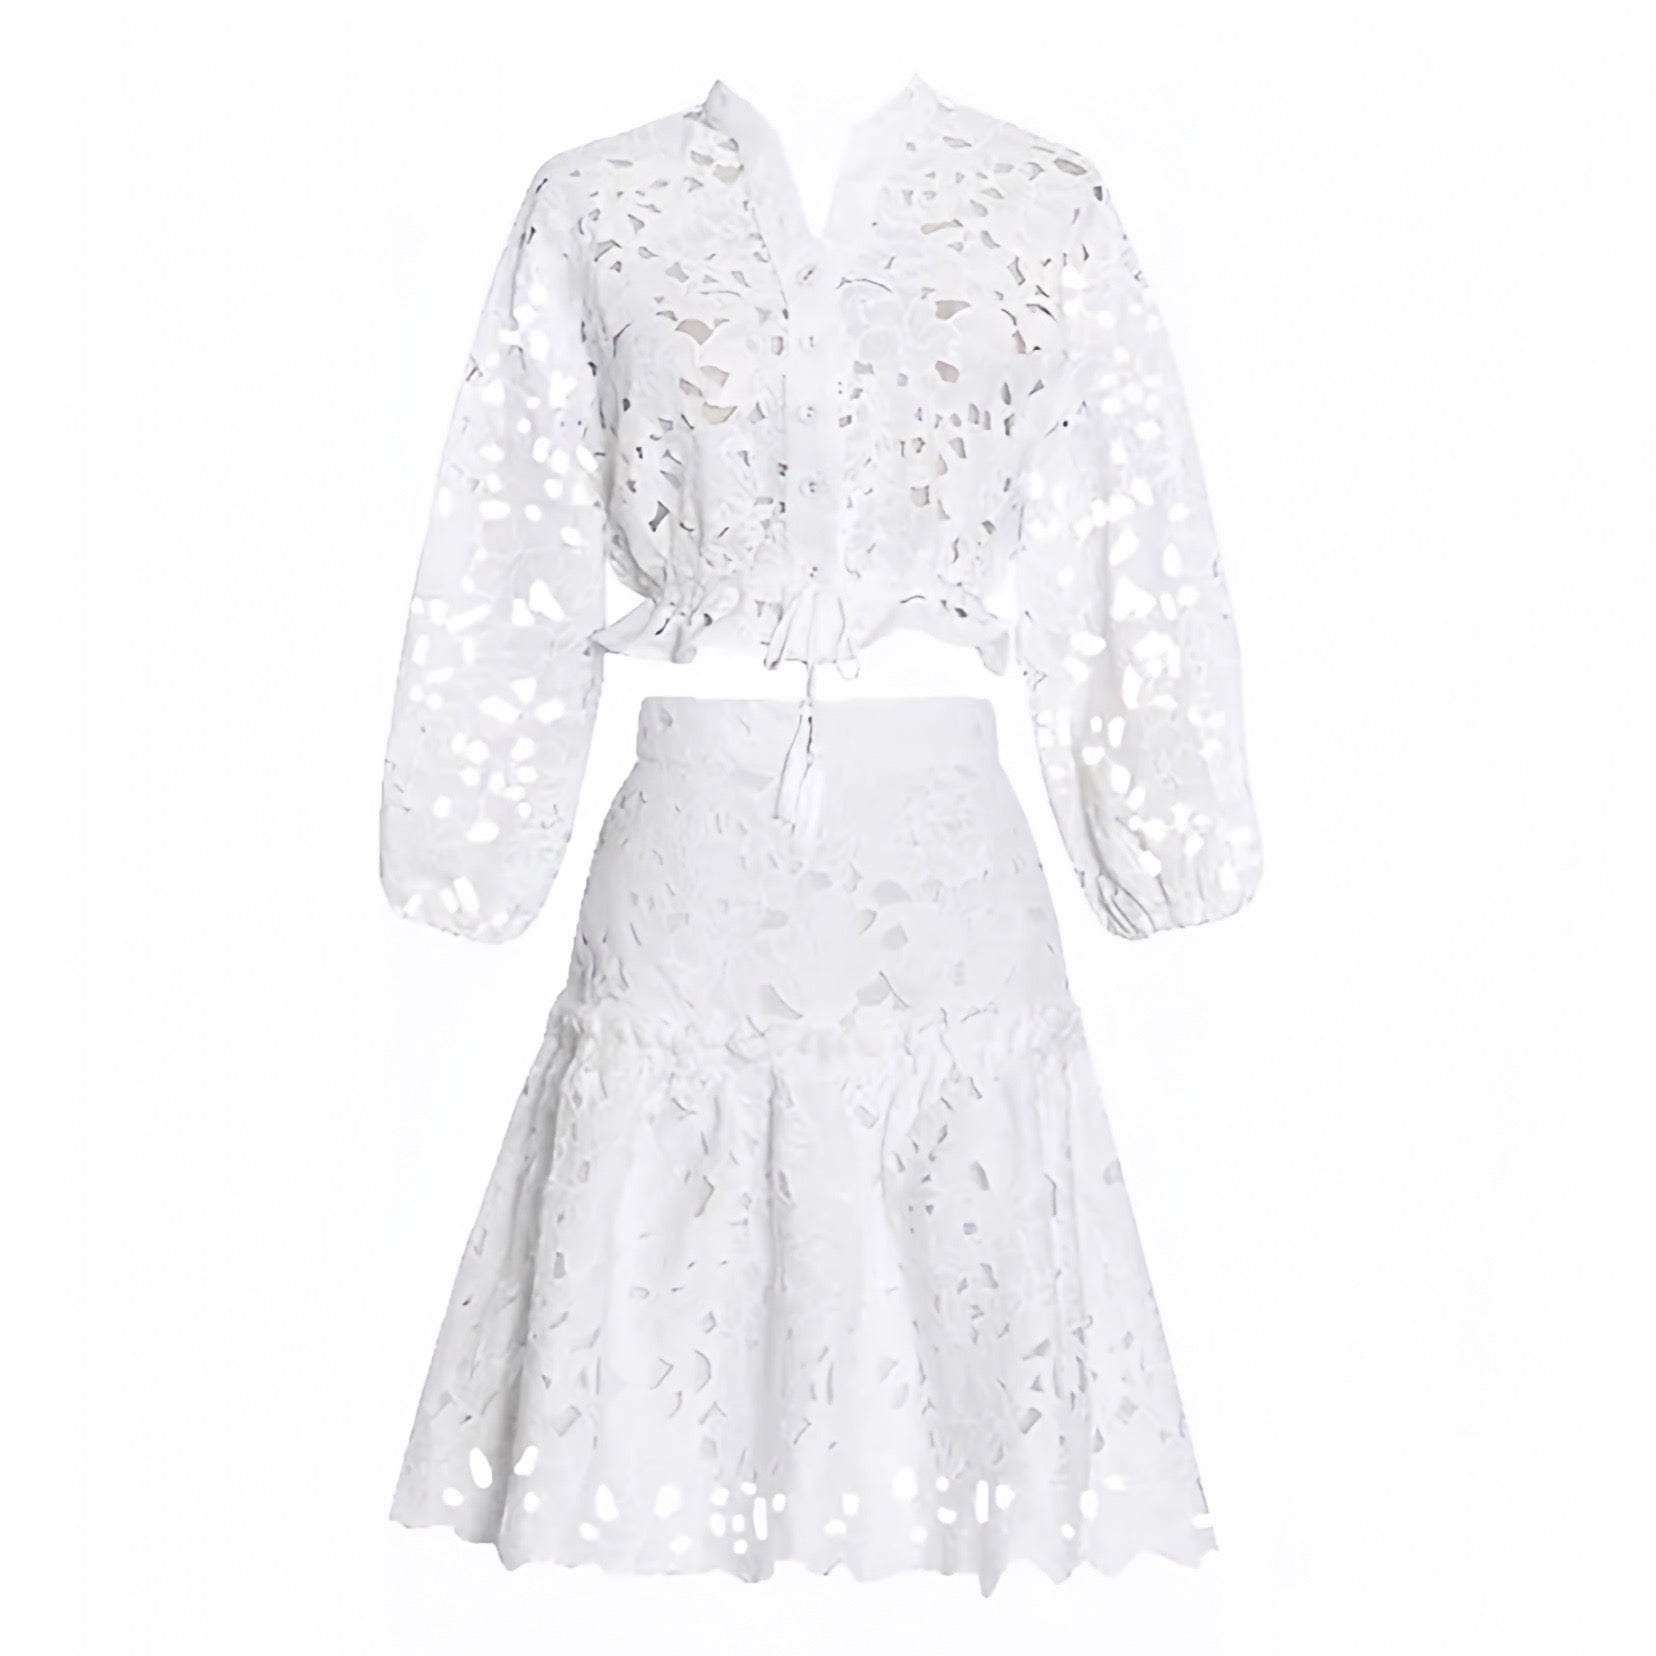 white-embroidered-eyelet-floral-patterned-button-down-long-puff-sleeve-crop-top-blouse-shirt-and-mid-high-rise-waist-mini-midi-skirt-two-piece-set-dress-women-ladies-chic-trendy-spring-2024-summer-elegant-casual-semi-formal-classy-feminine-preppy-style-european-beach-wear-tropical-vacation-sundress-zara-revolve-aritzia